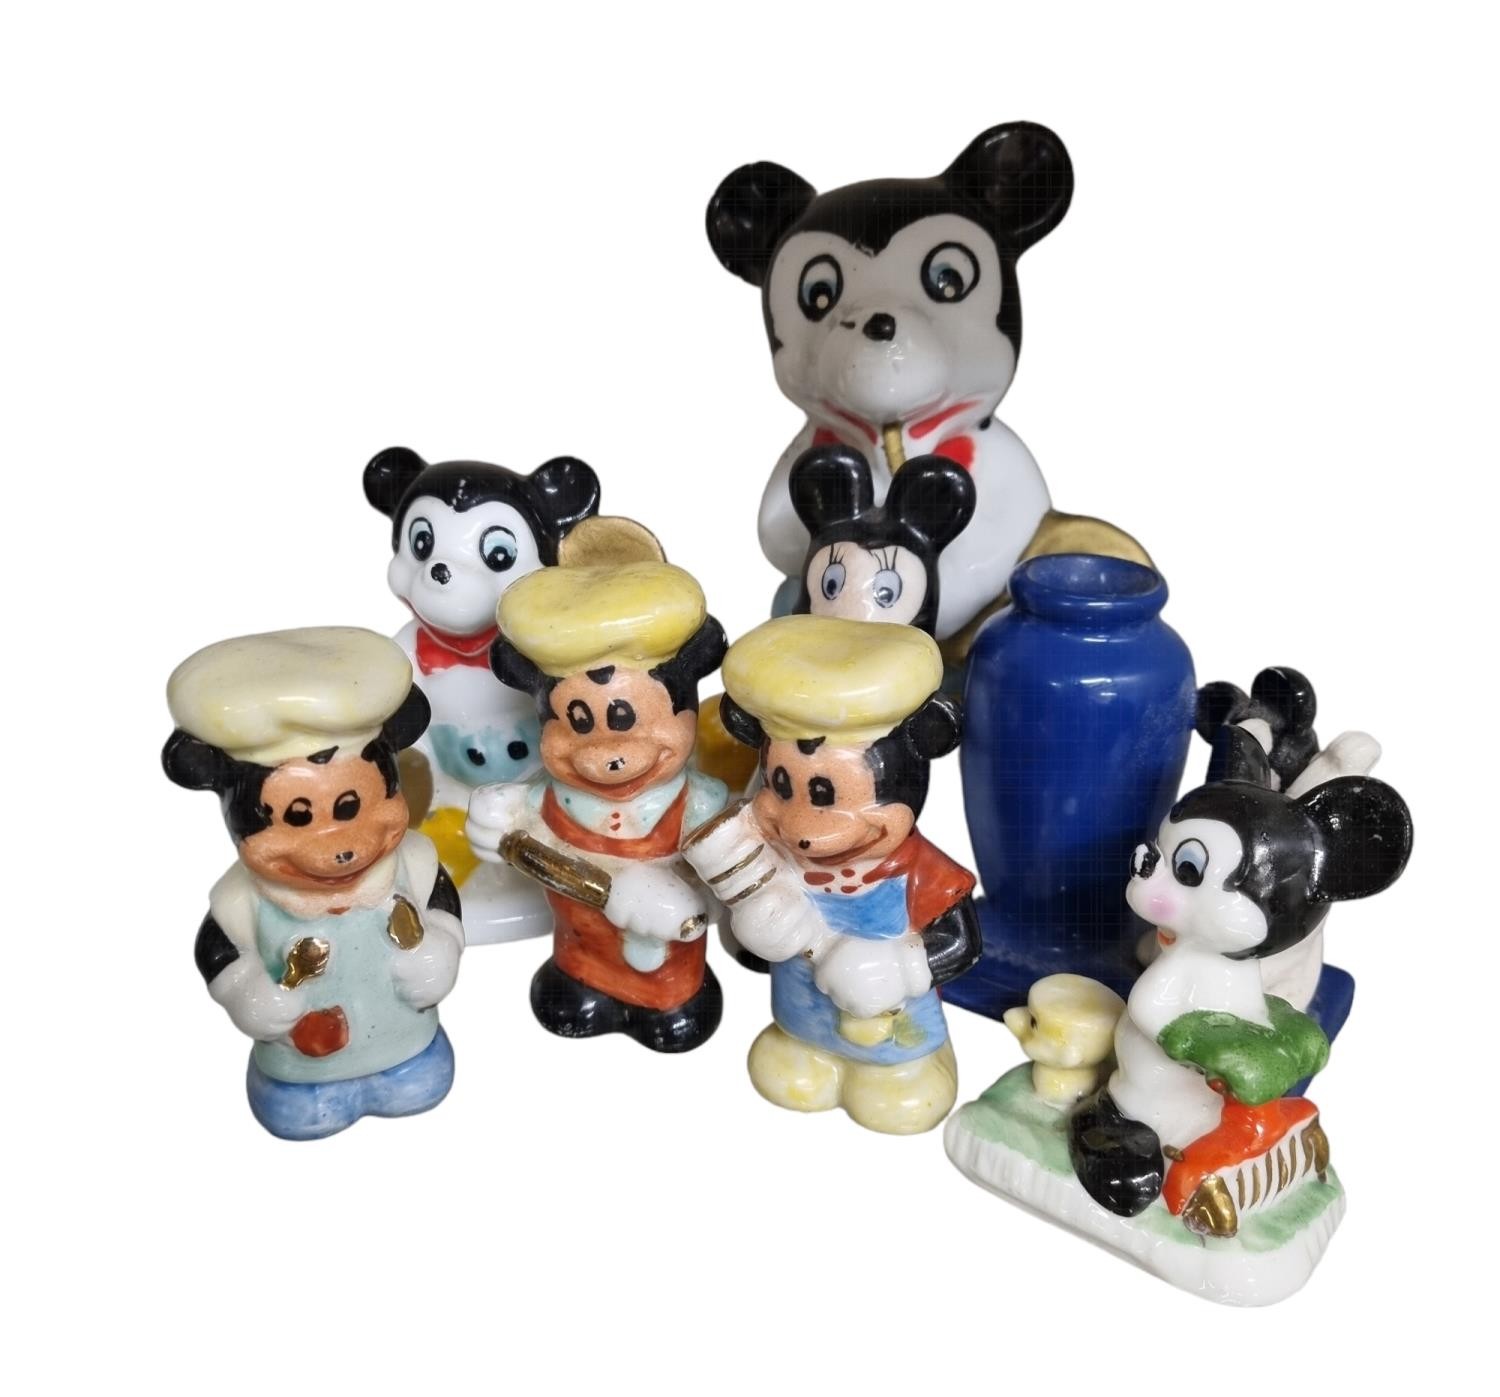 Disney: Small Group of Vintage Ceramic Mickey & Minnie Mouse Style Figurines